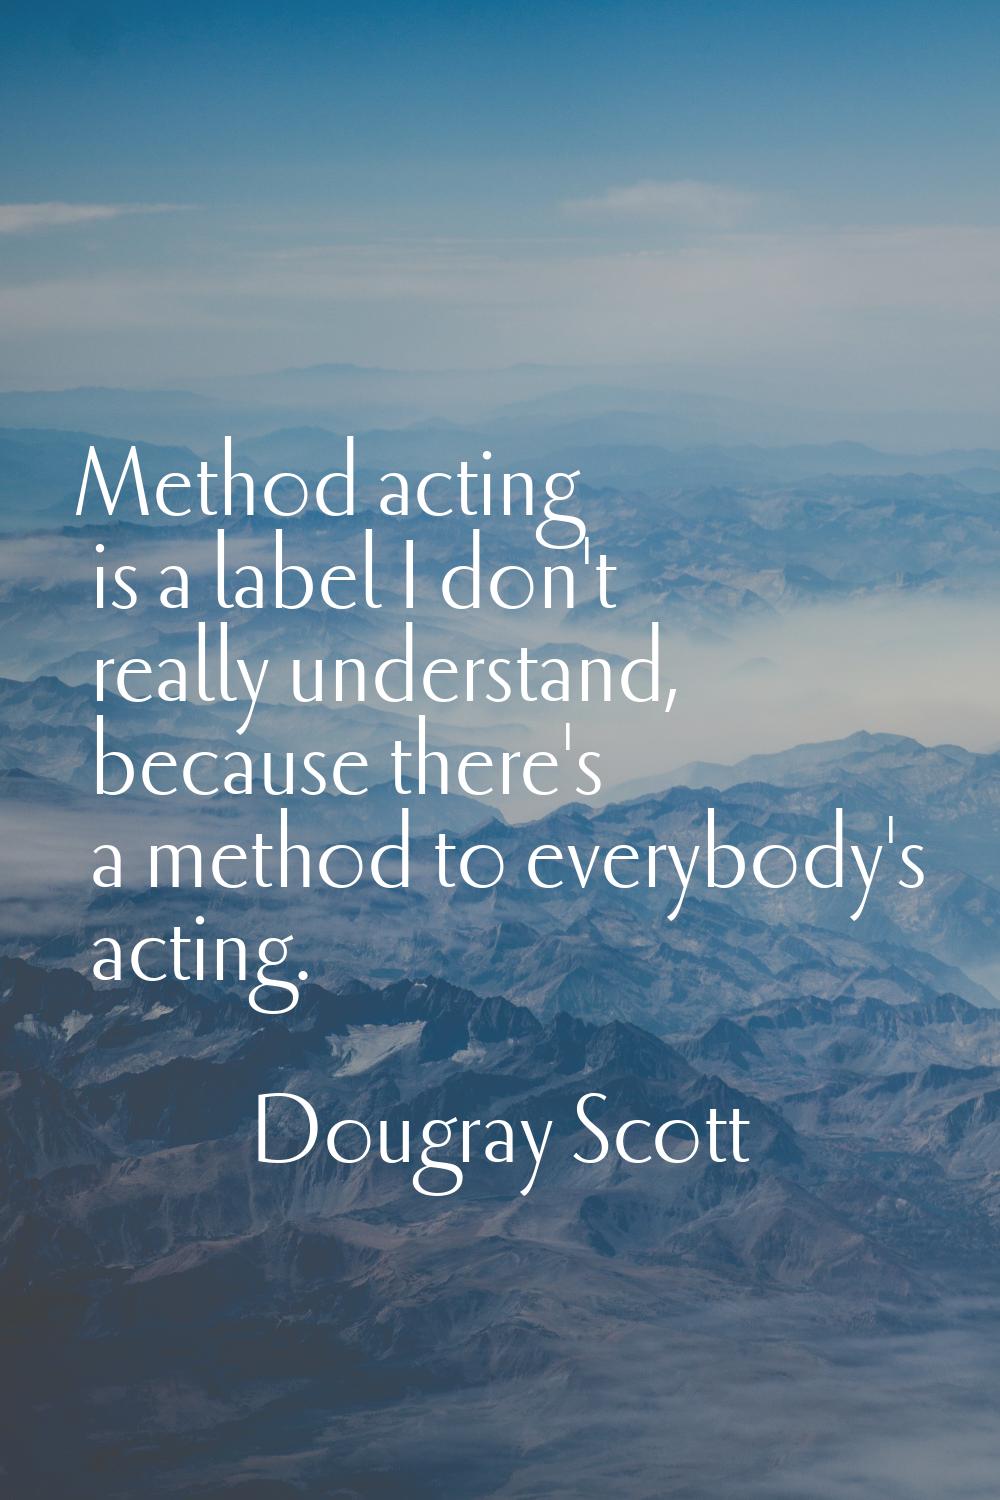 Method acting is a label I don't really understand, because there's a method to everybody's acting.